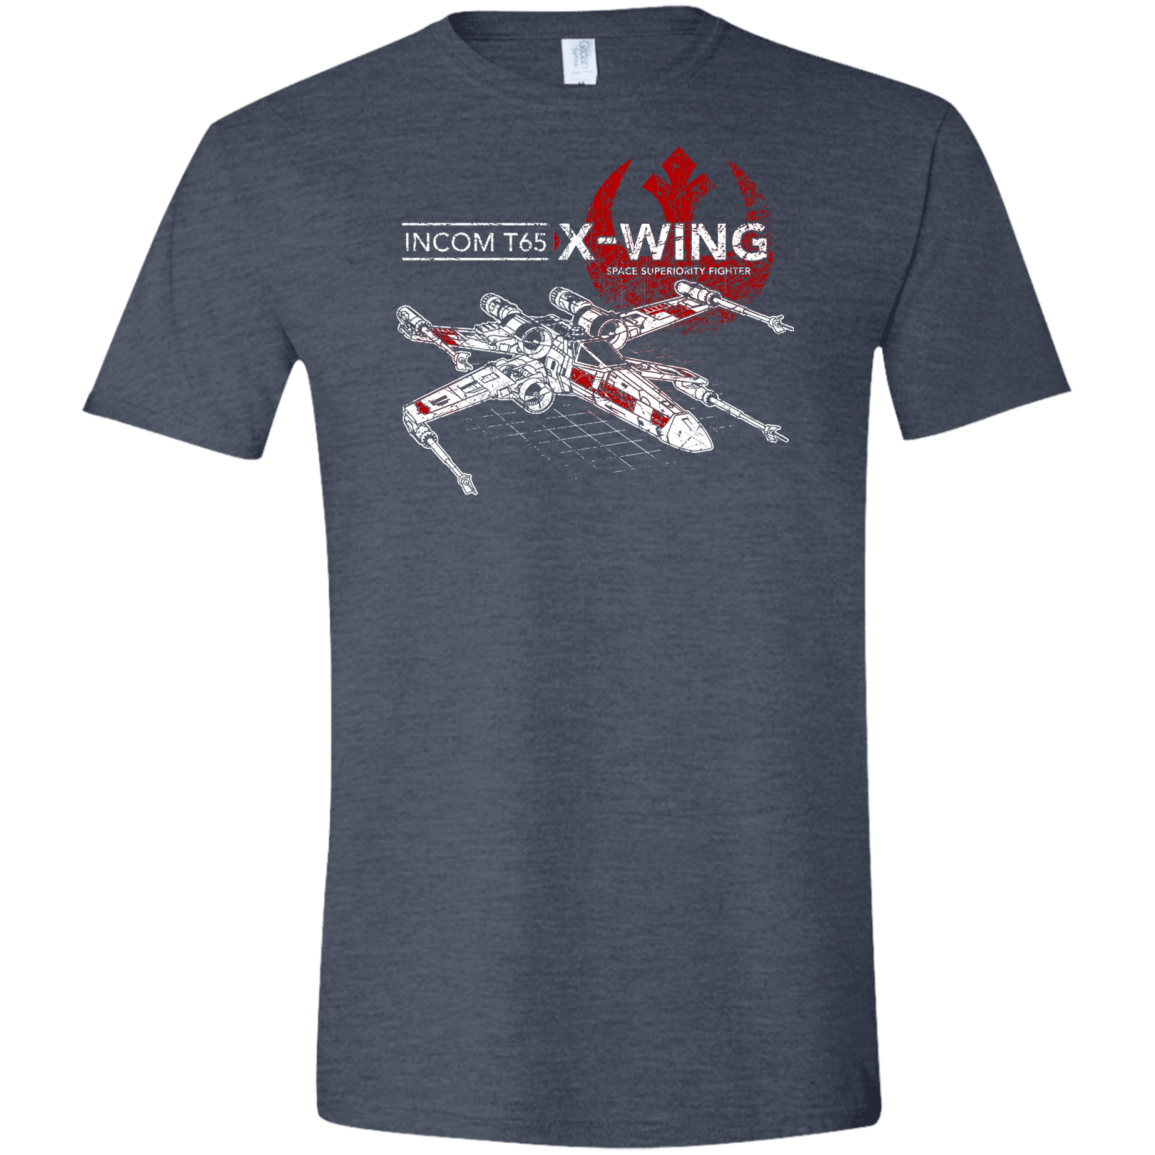 T-Shirts Heather Navy / S T-65 X-Wing Men's Semi-Fitted Softstyle